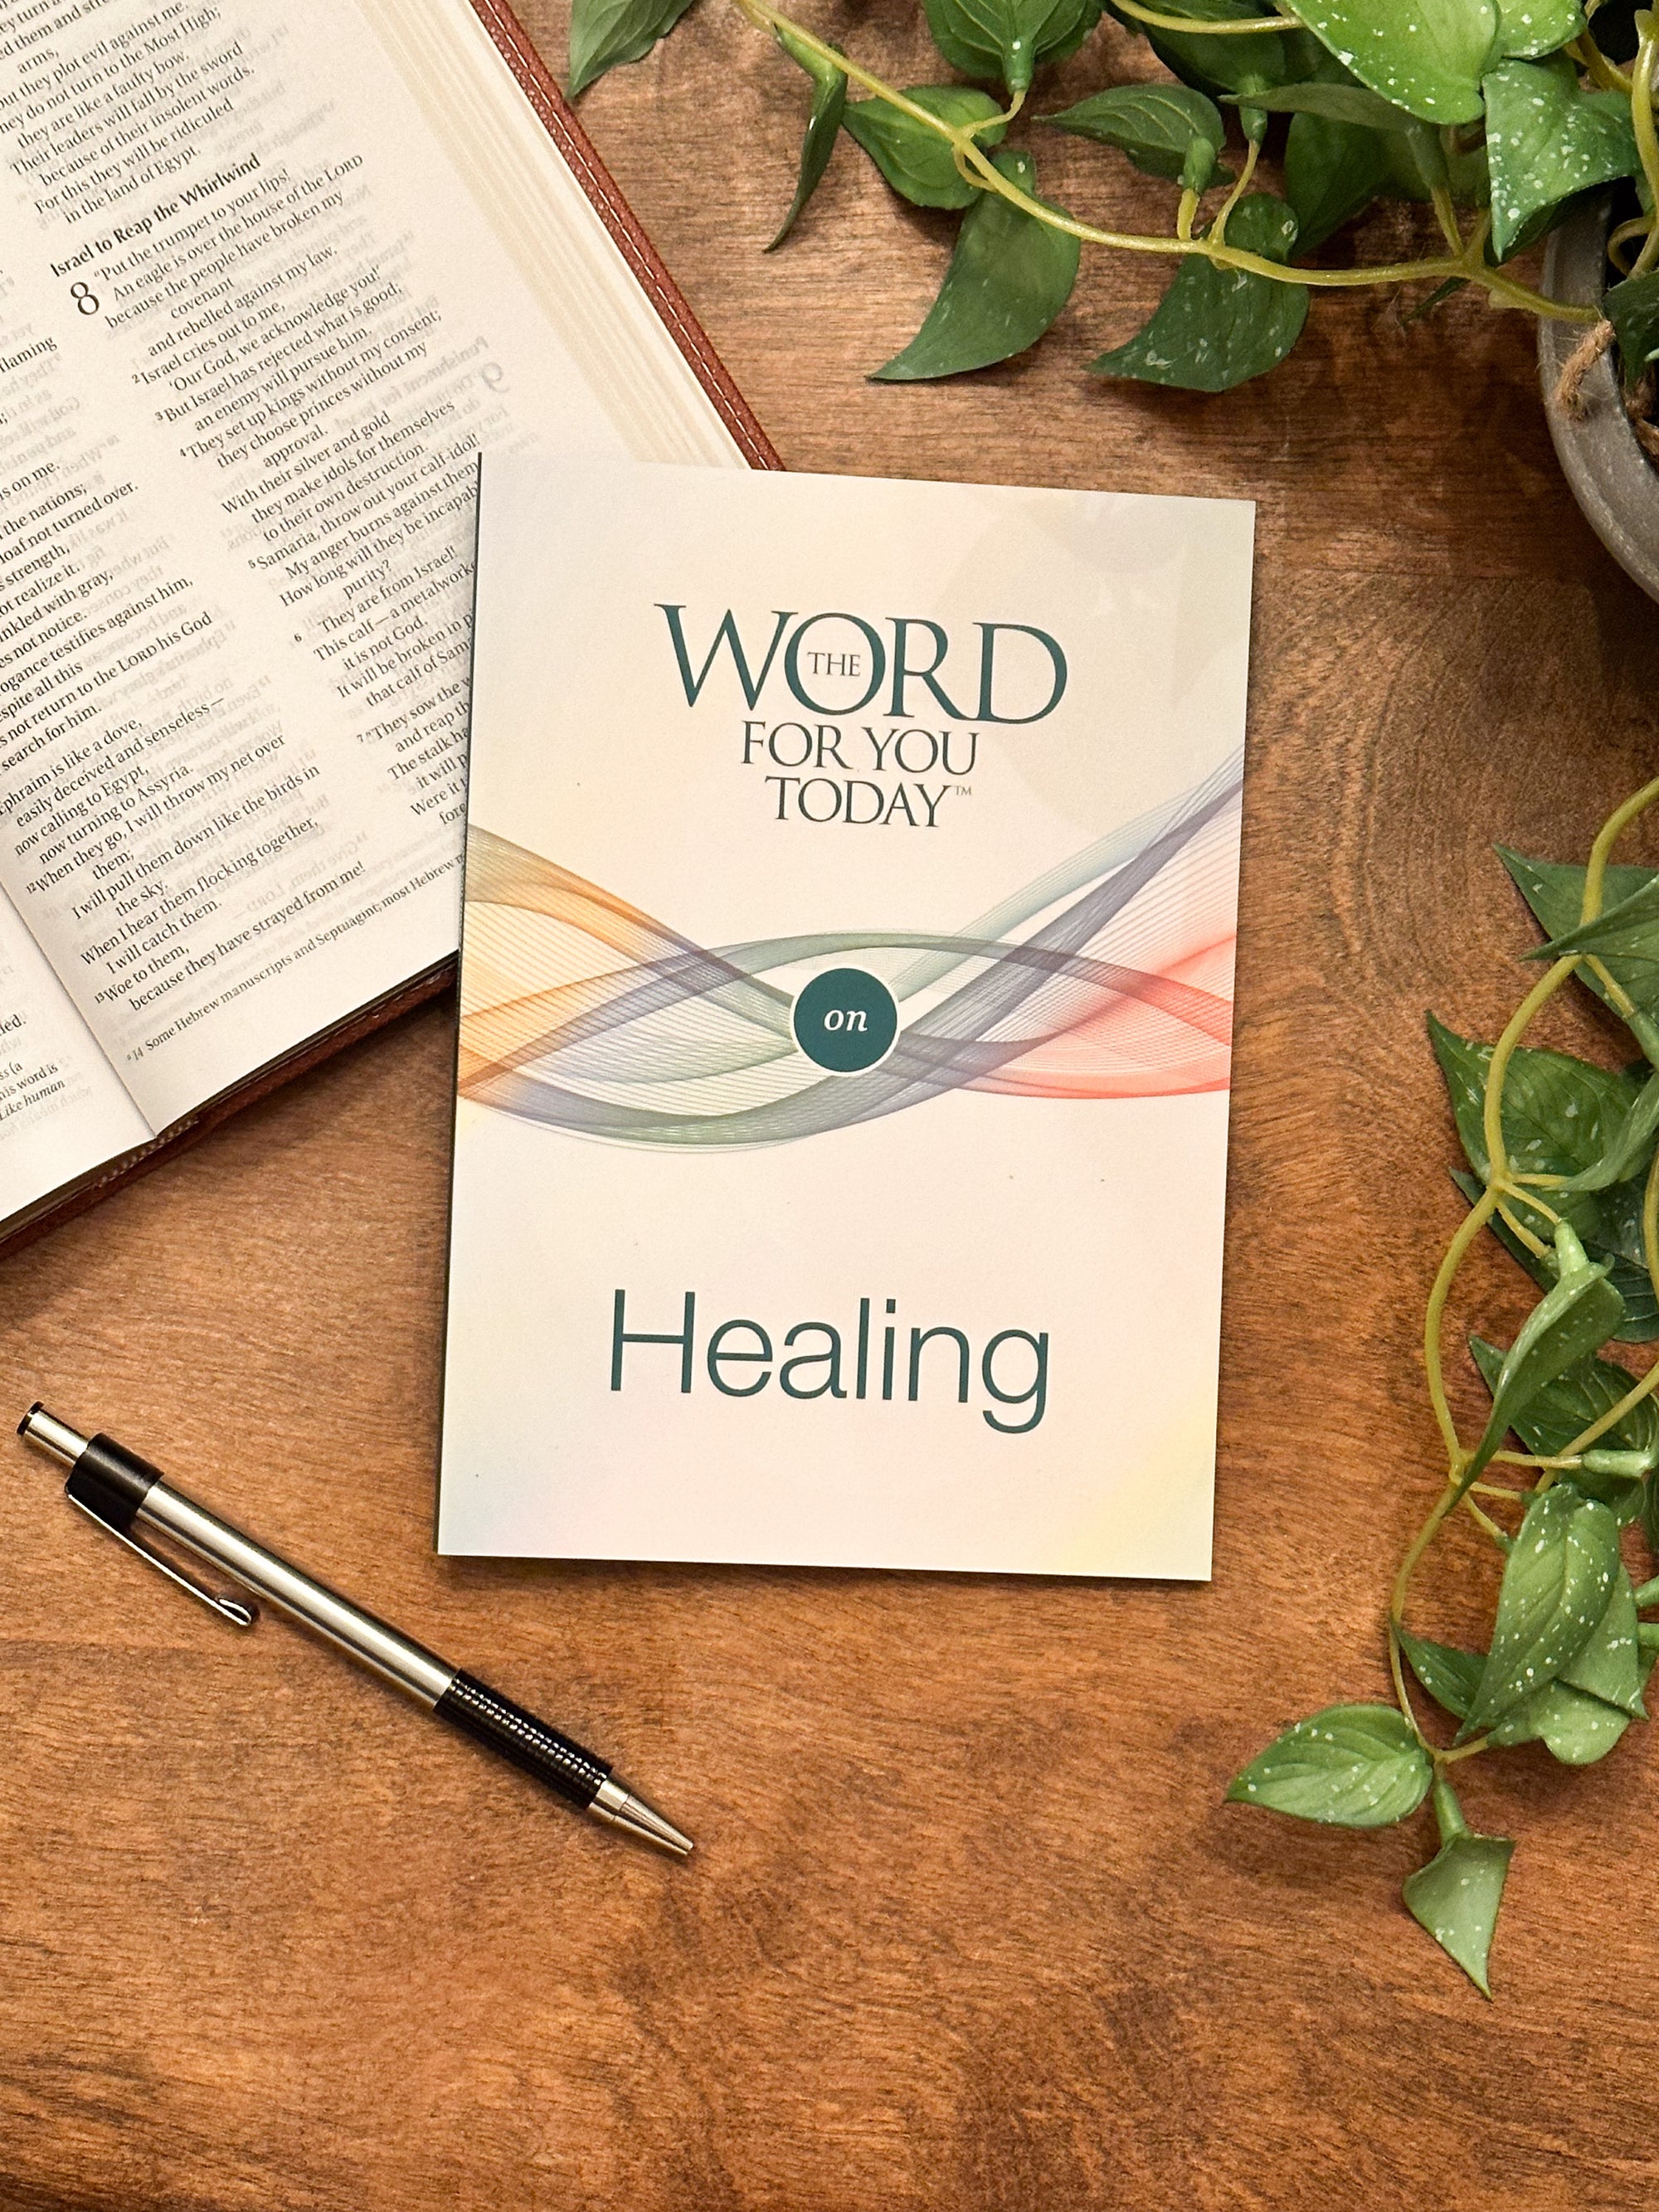 The Word For You Today on Healing